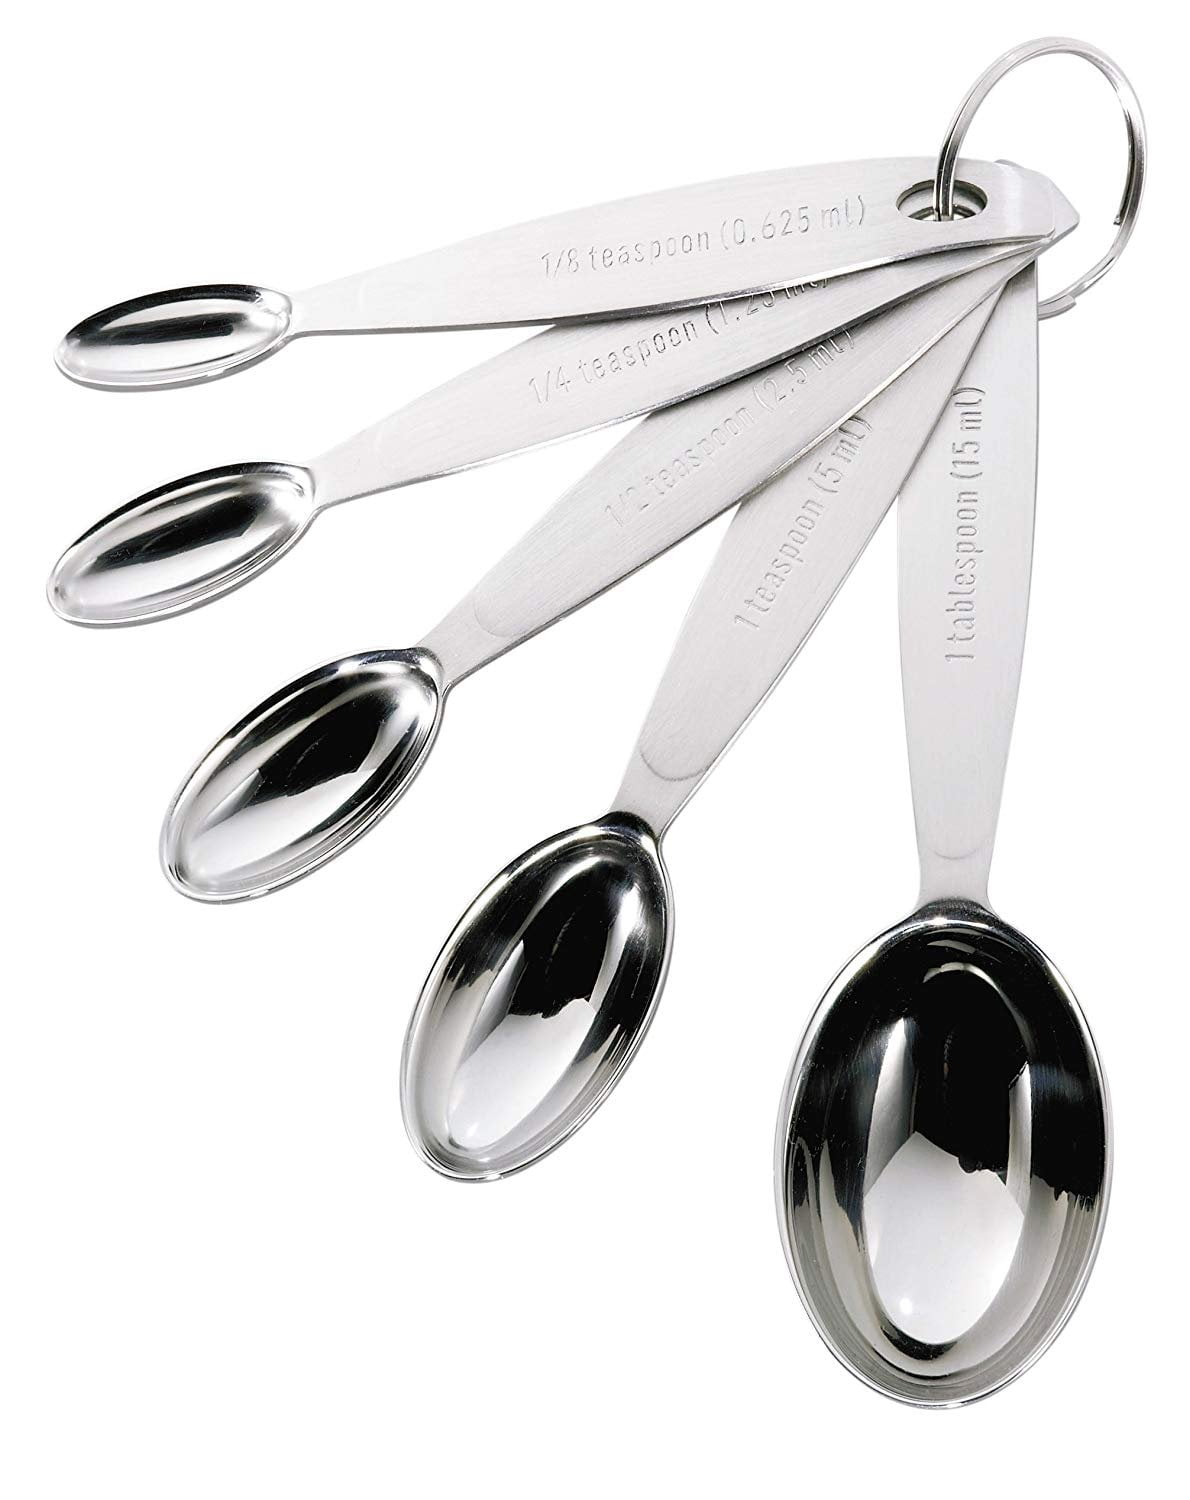 5Pcs Measuring Spoons Set Stainless Steel - HYQO Metal Teaspoon Measuring  Spoons Stainless Steel Kitchen Set Coffee Measuring Spoon - Small Spoons  for